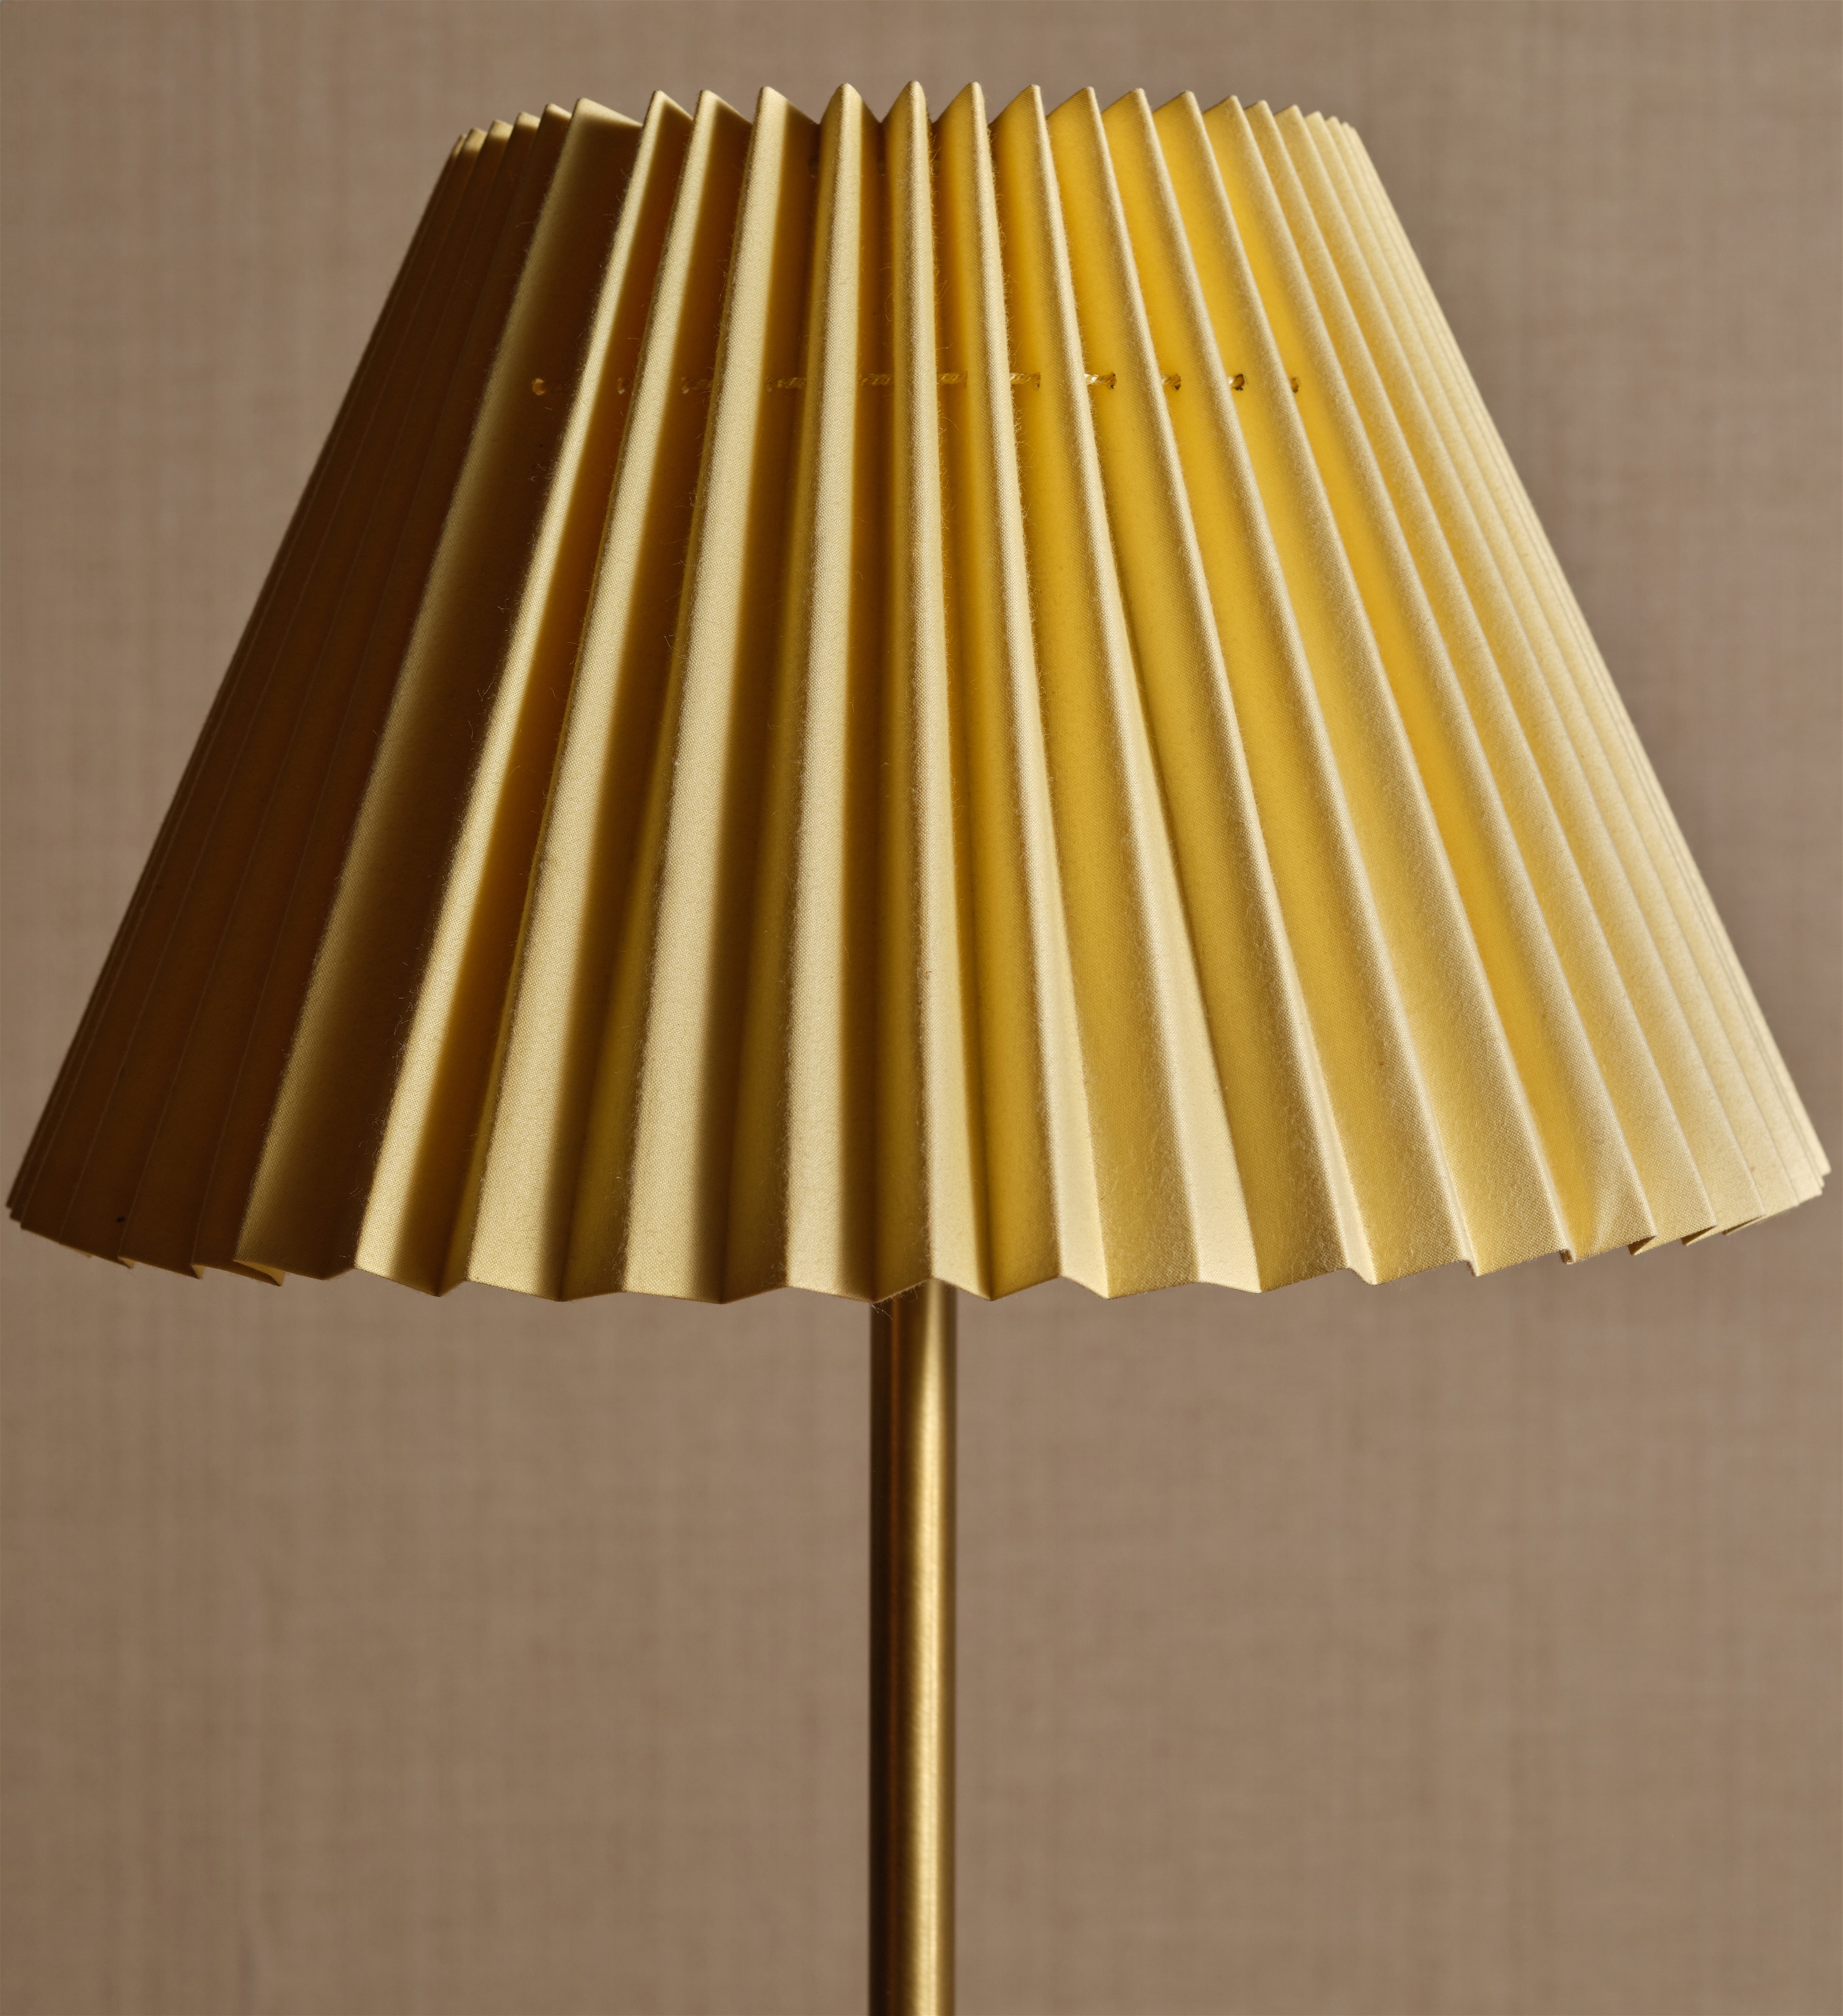 a lamp that is on top of a table